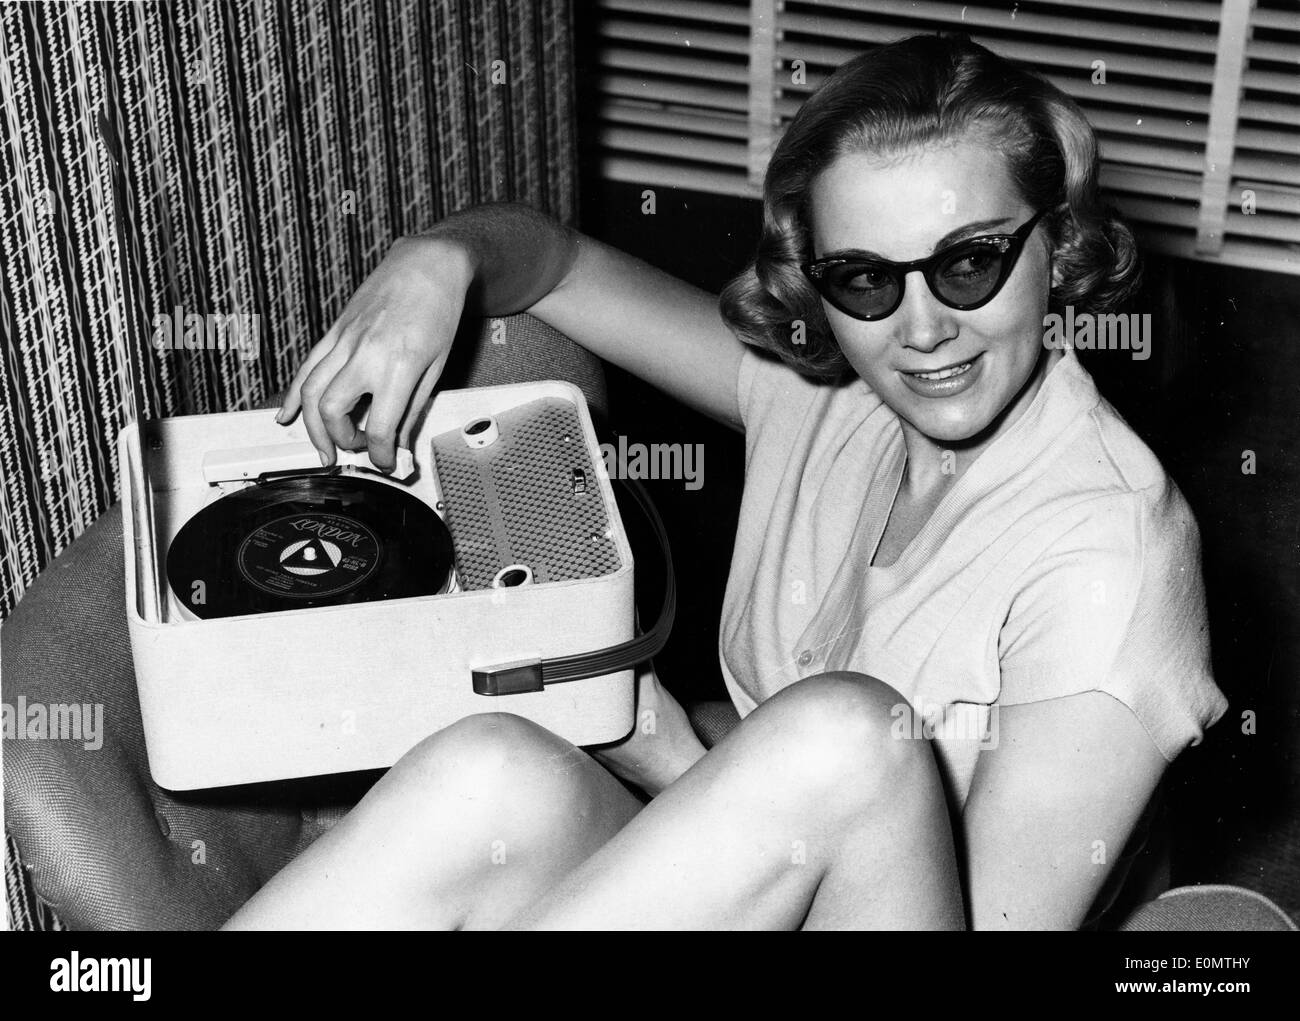 Small portable record player on display Stock Photo